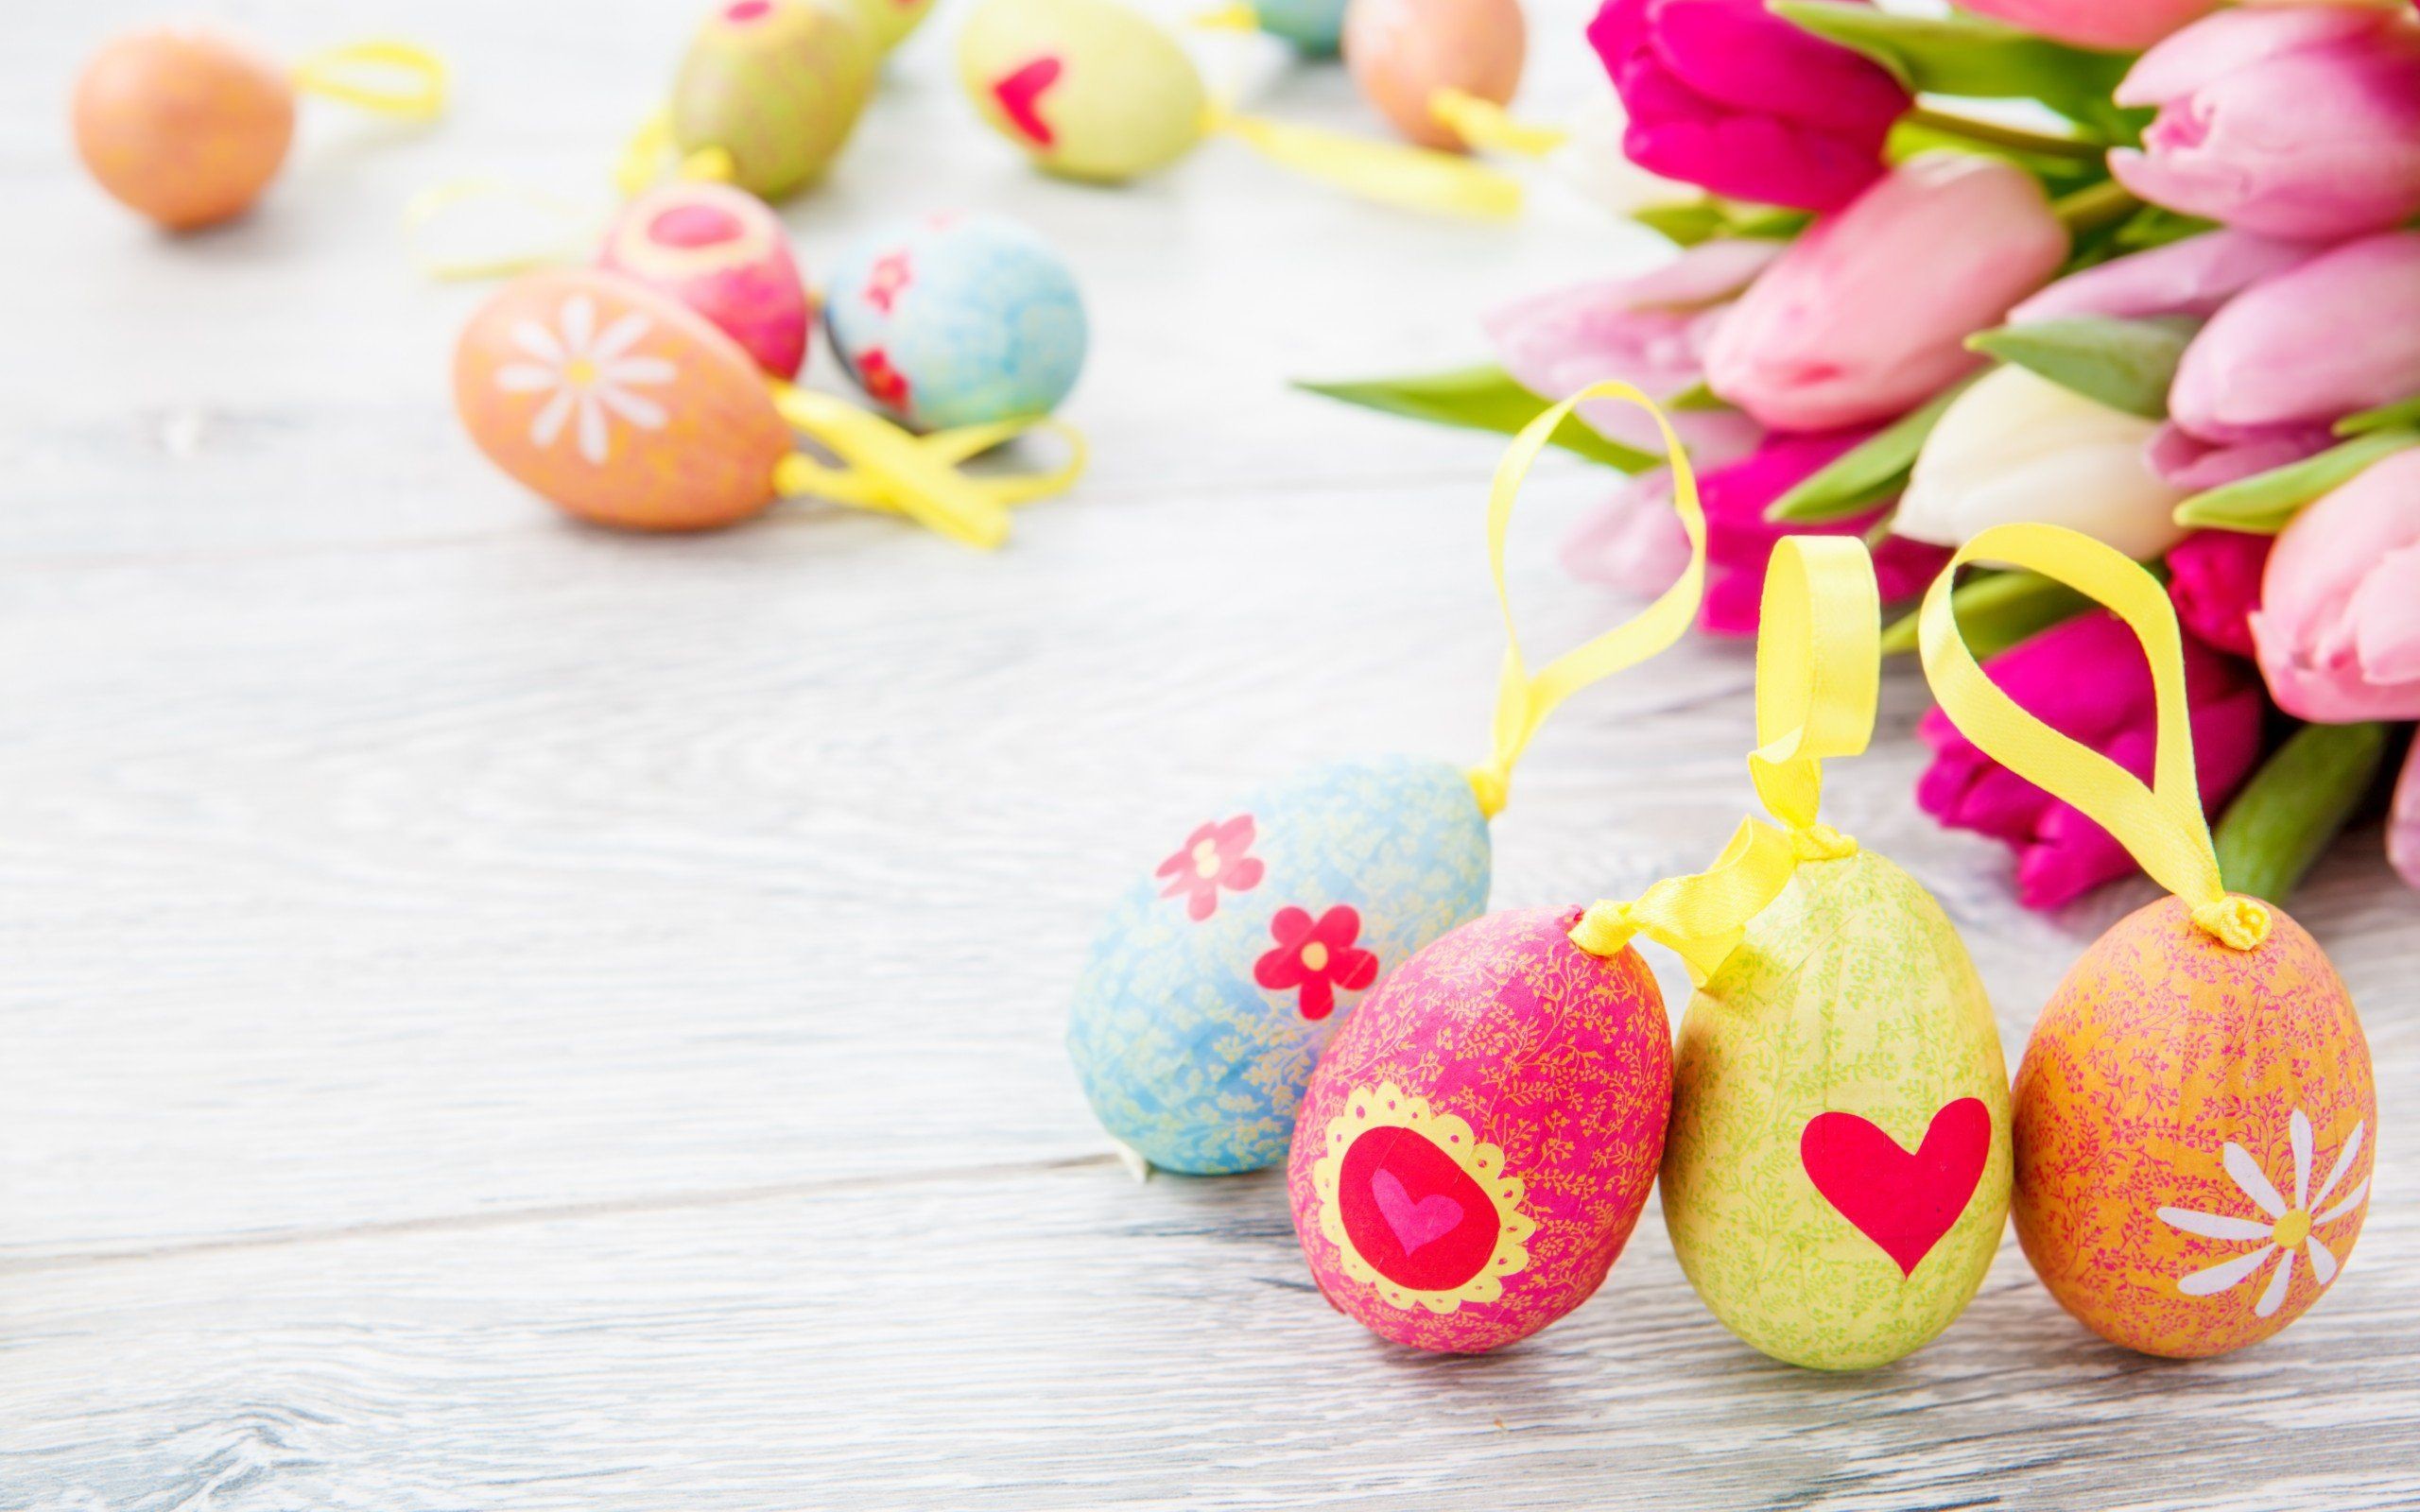 2560x1600 Easter Egg Decoration | 2560 x 1600 | Download | Close